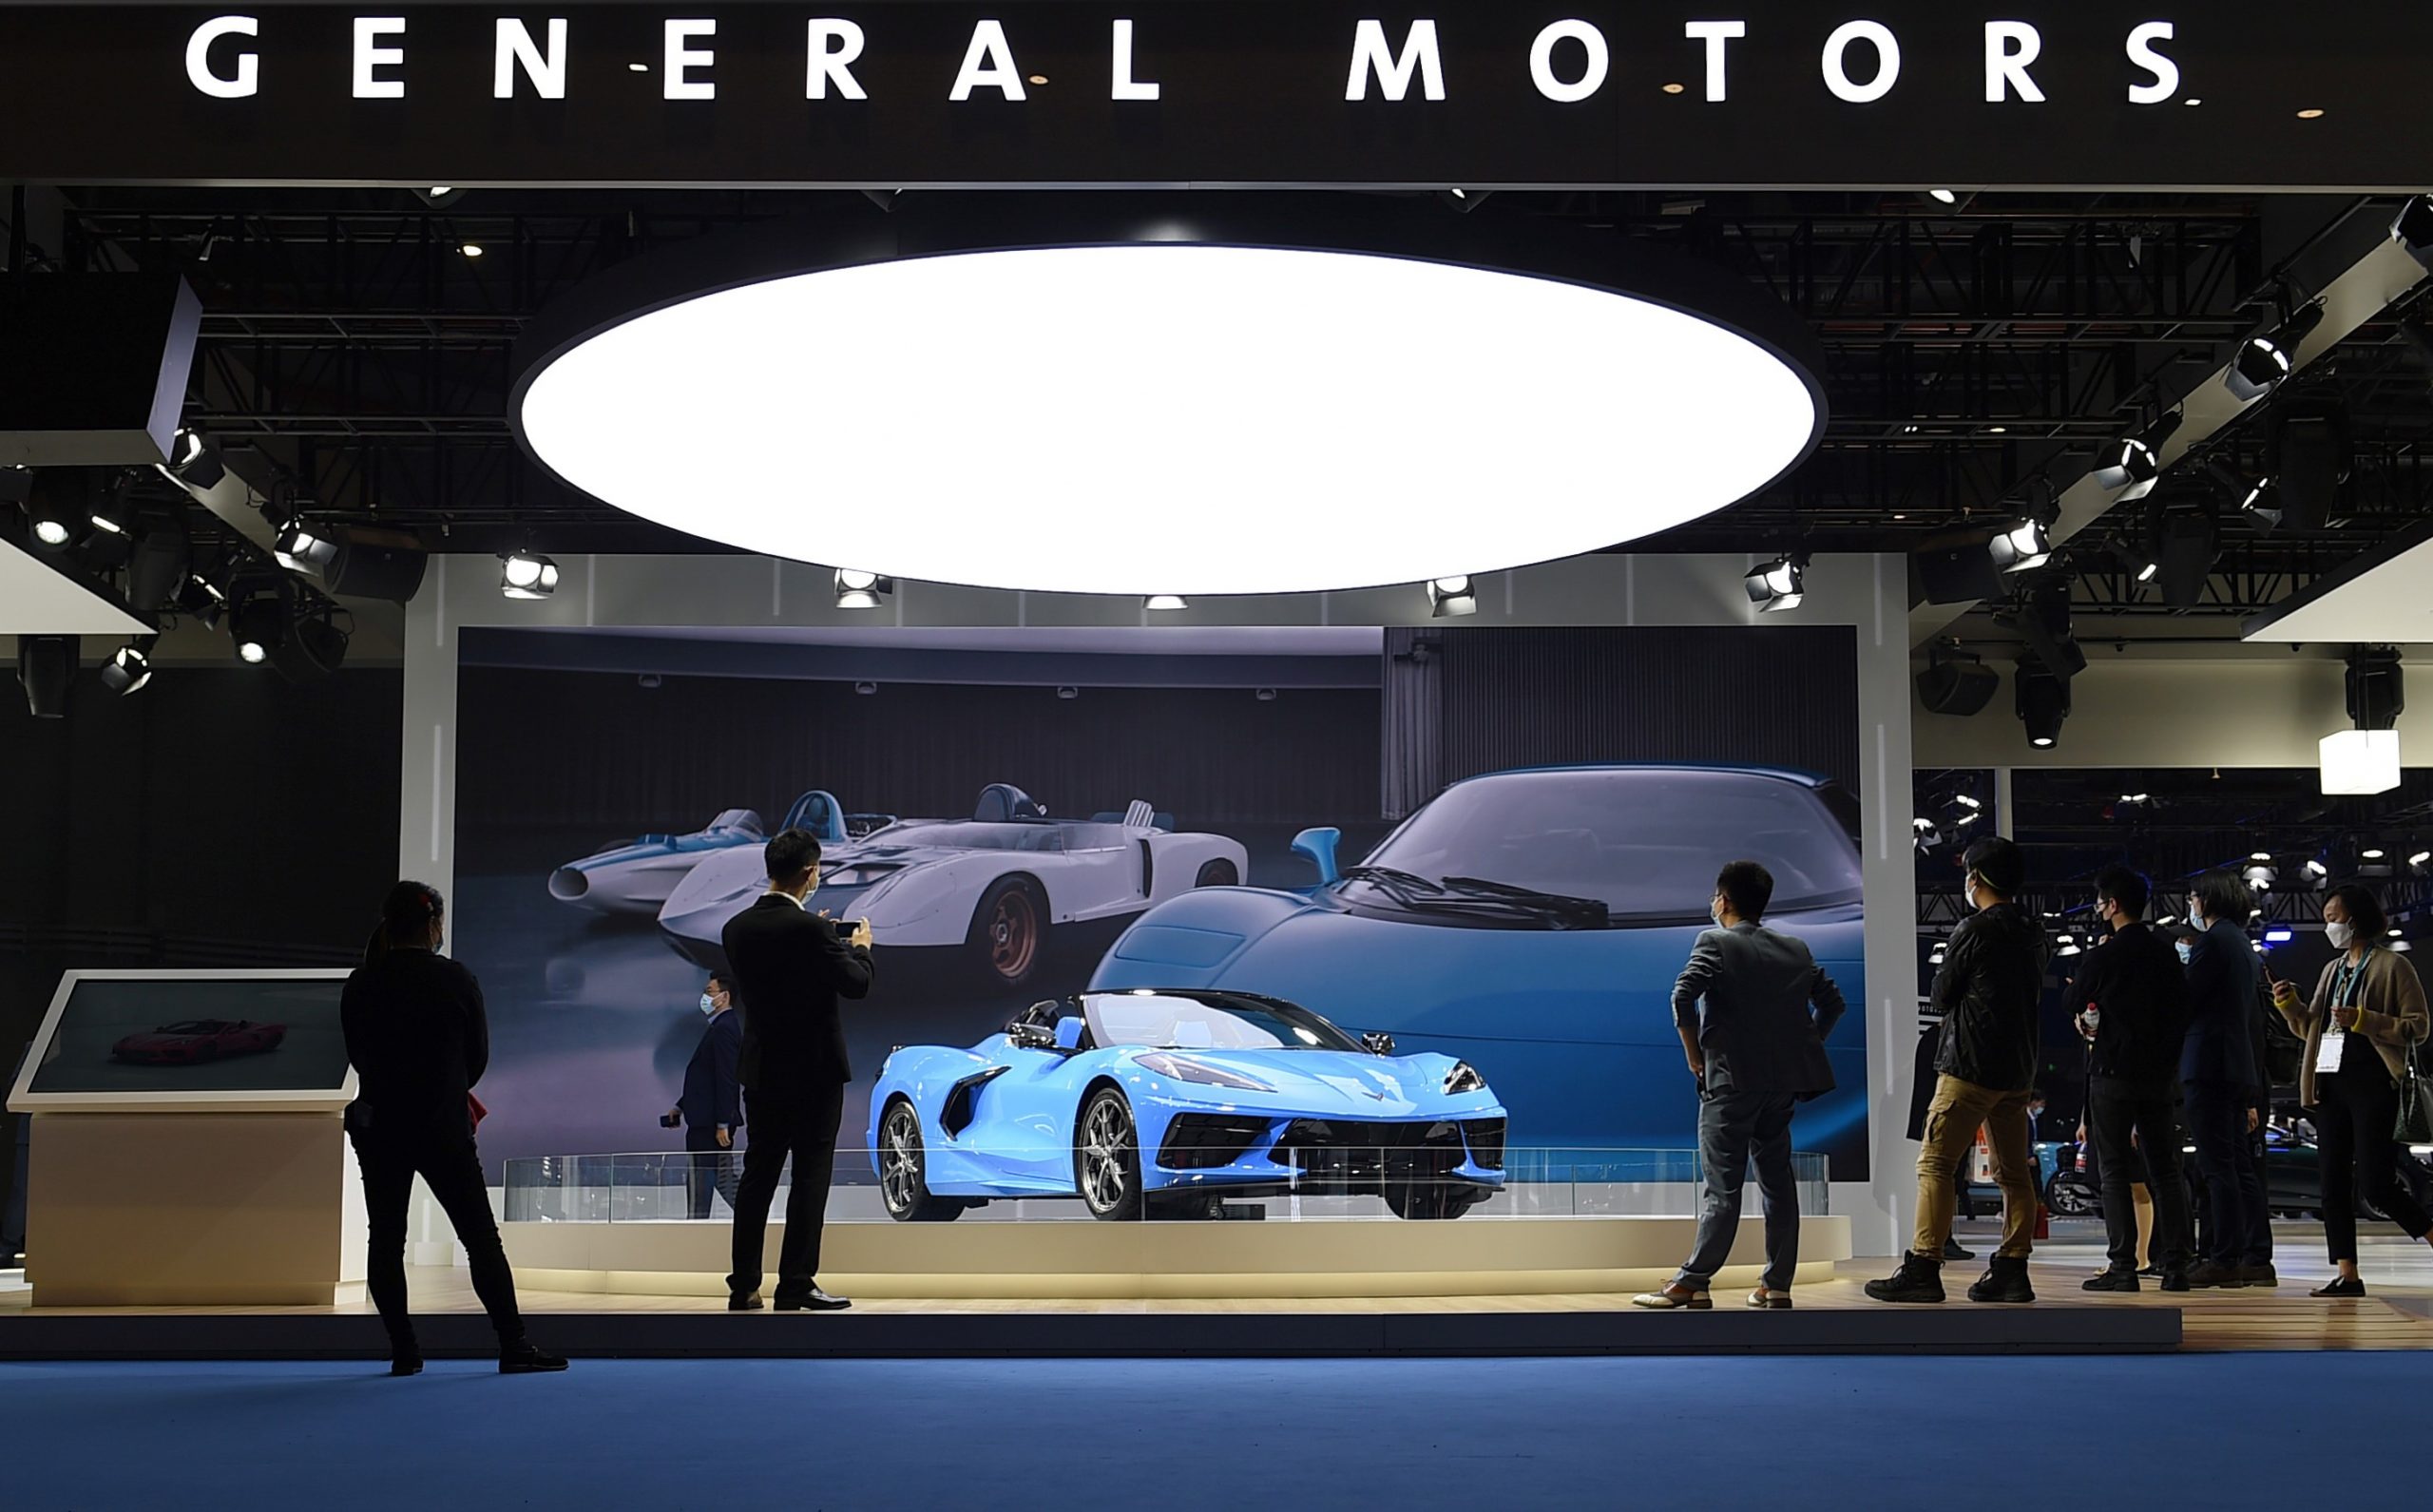 Visitors are attracted by a Chevrolet Corvette Stingray at the booth of General Motors at the Automobile exhibition area